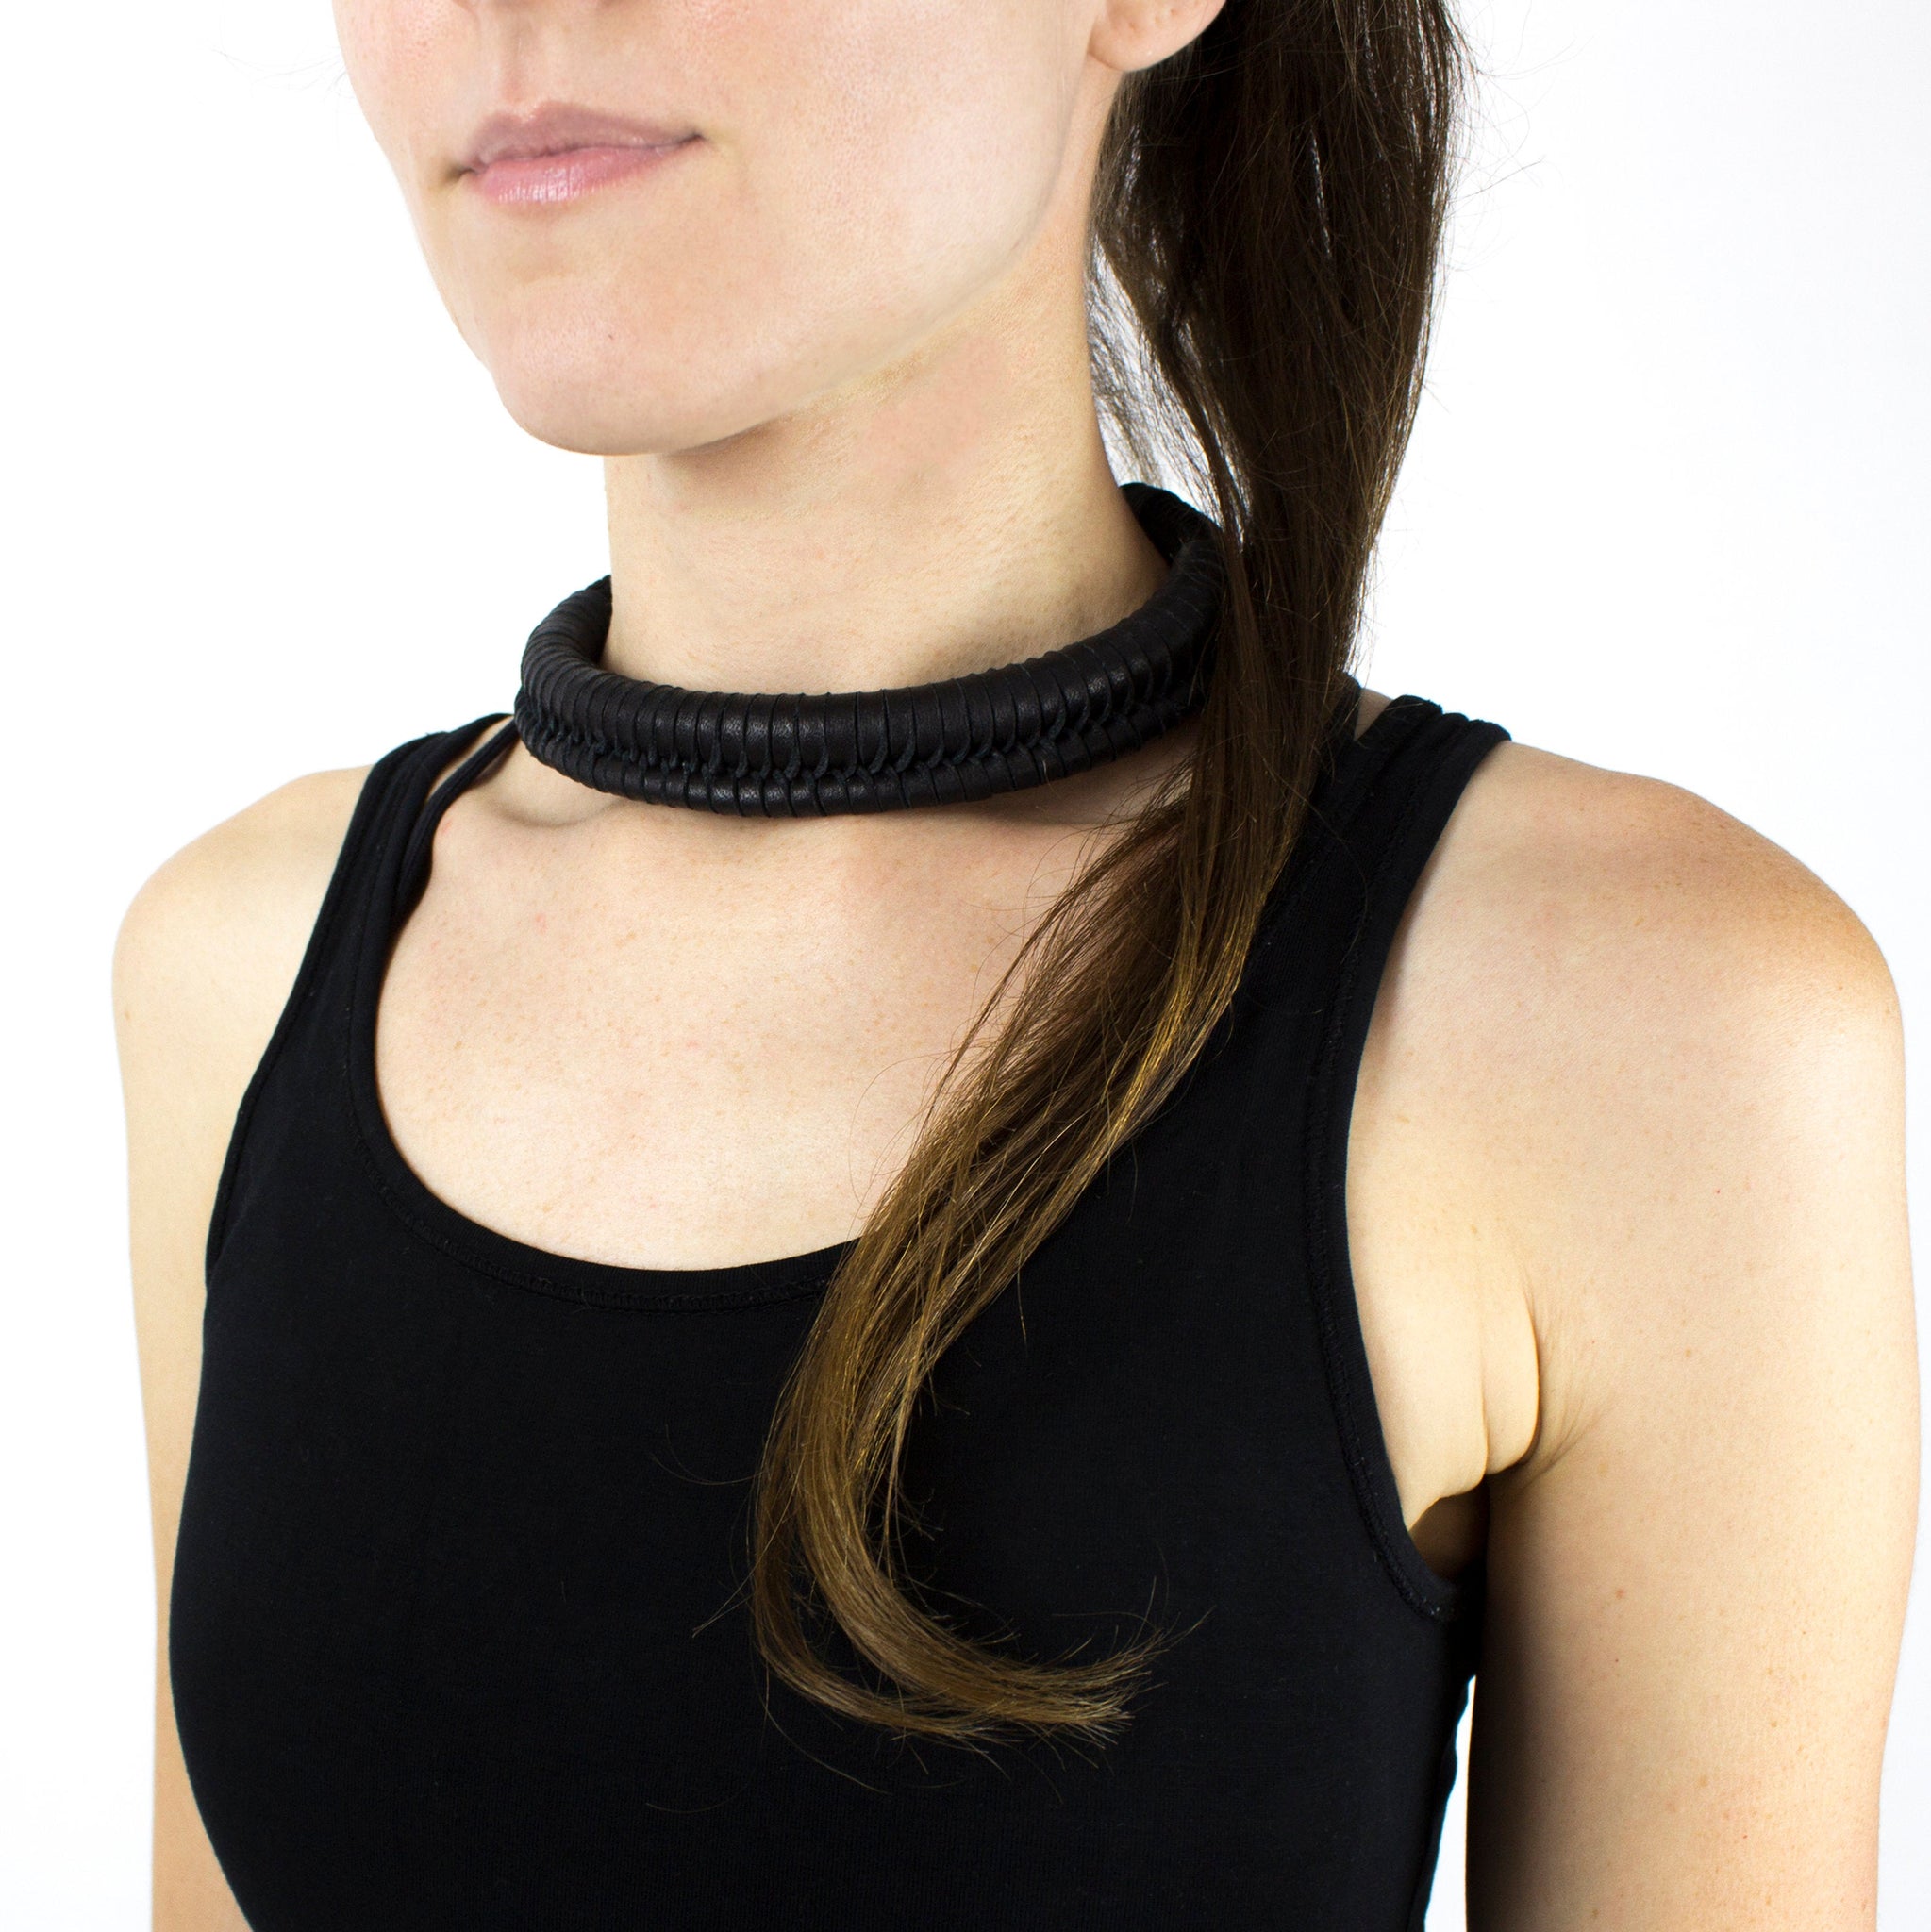 Black leather and rope necklace handmade minimal macrame knotted-adjustable, black, black leather necklace, black necklace, bold, collar, designer, designer jewelry, hand-woven, Jewelry, knotted, leather jewelry, leather necklace, macrame, minimal, minimalist, Necklace, recycled, recycled jewelry, recycled_leather, string, thick, tie, unique-Mimikri